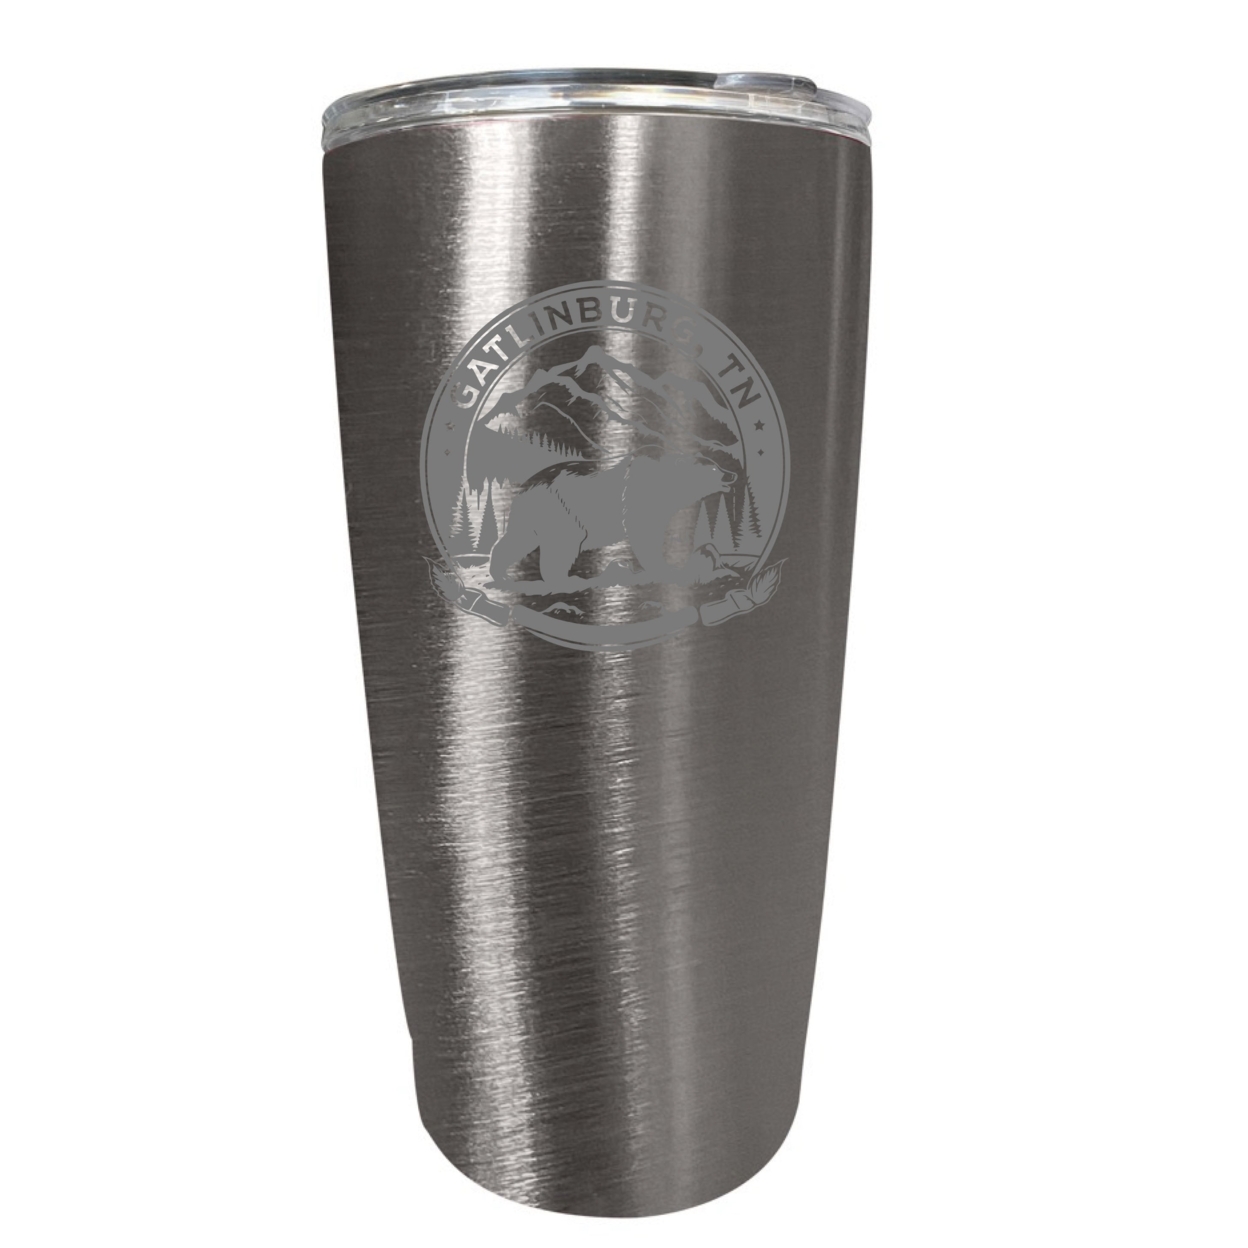 Gatlinburg Tennessee Laser Etched Souvenir 16 Oz Stainless Steel Insulated Tumbler - Steel